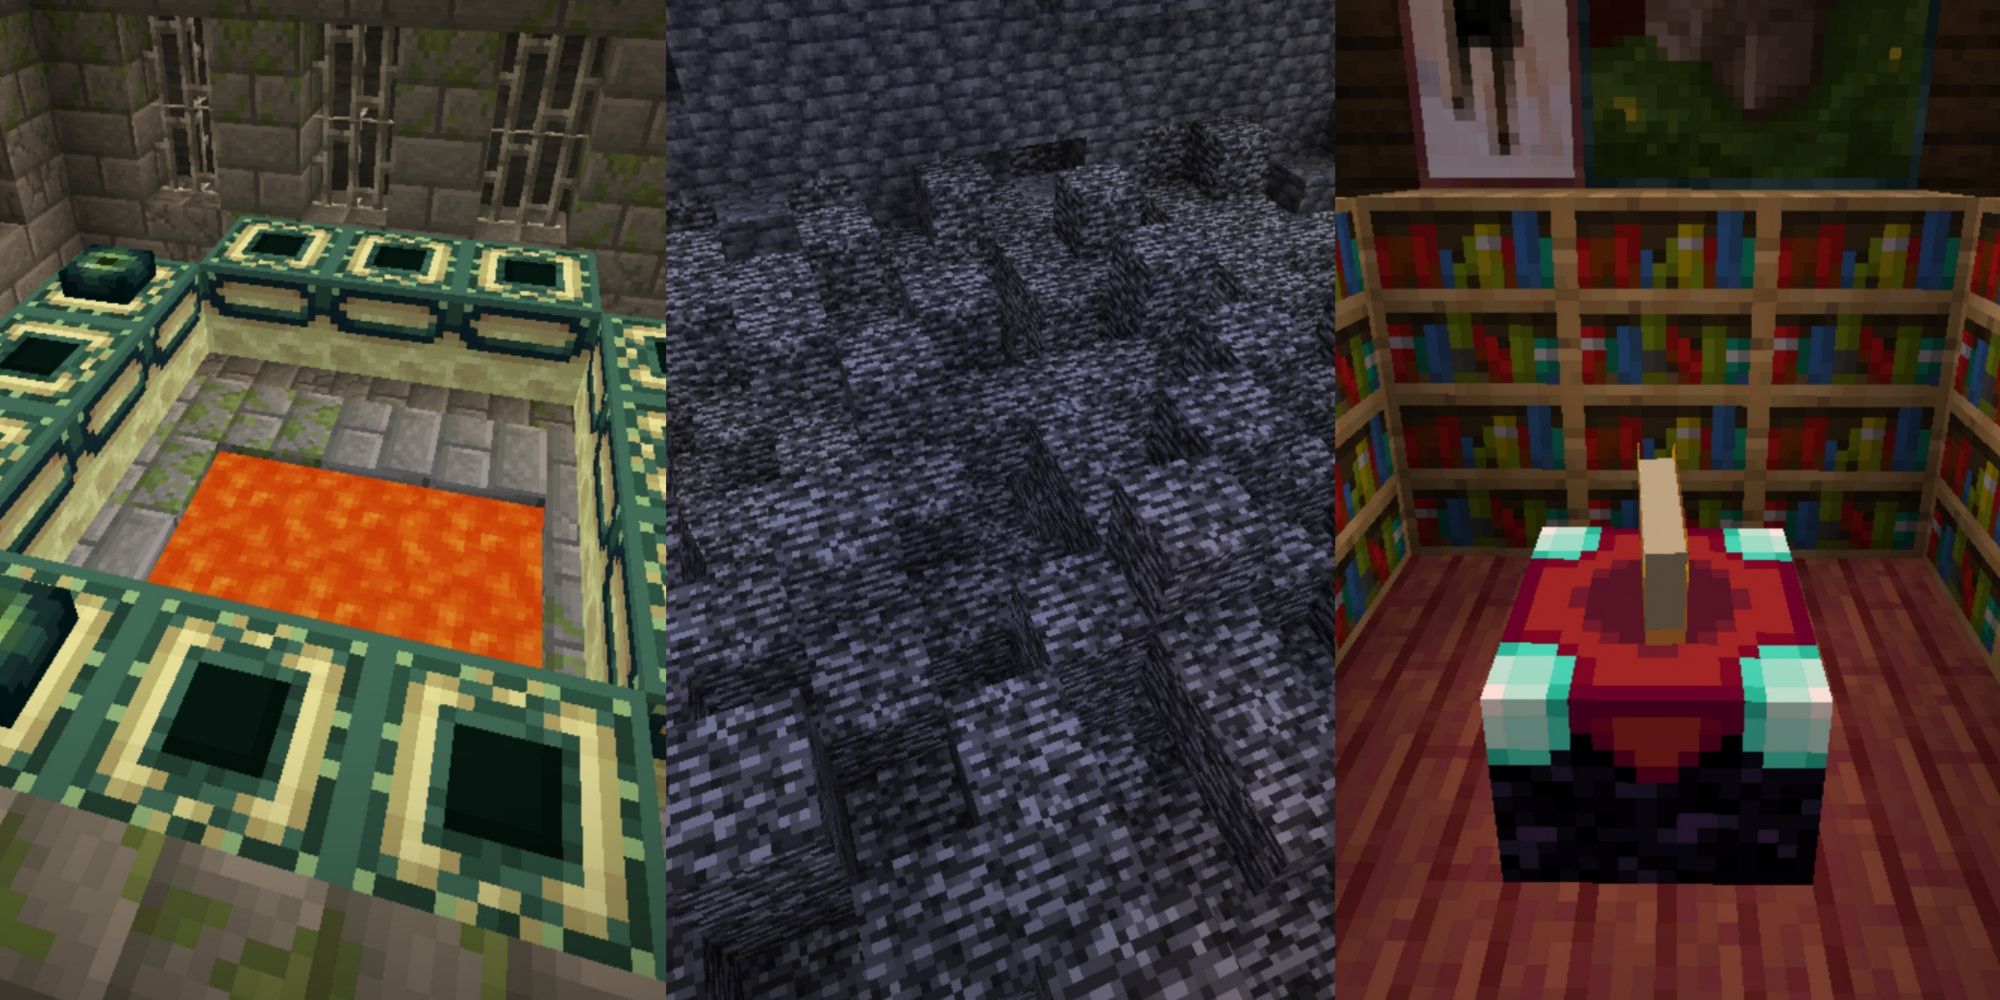 Three minecraft pictures including an end portal frame, bedrock, and an enchanting table